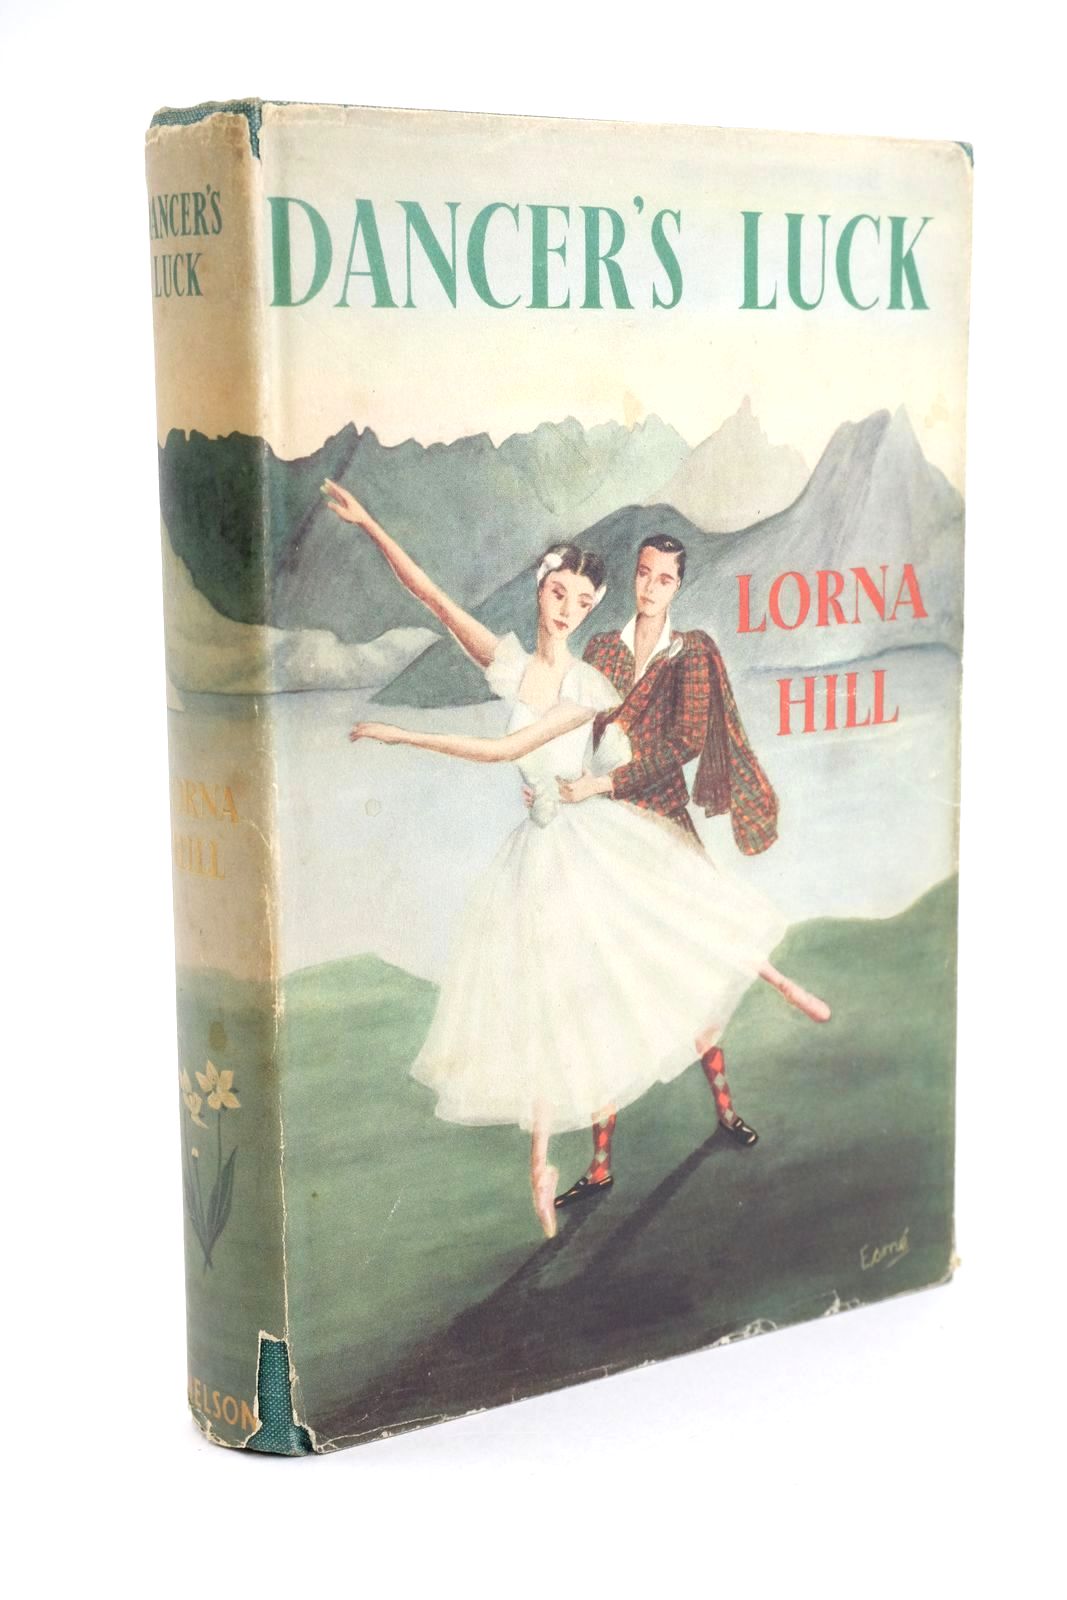 Photo of DANCER'S LUCK written by Hill, Lorna illustrated by Verity, Esme published by Thomas Nelson and Sons Ltd. (STOCK CODE: 1323768)  for sale by Stella & Rose's Books